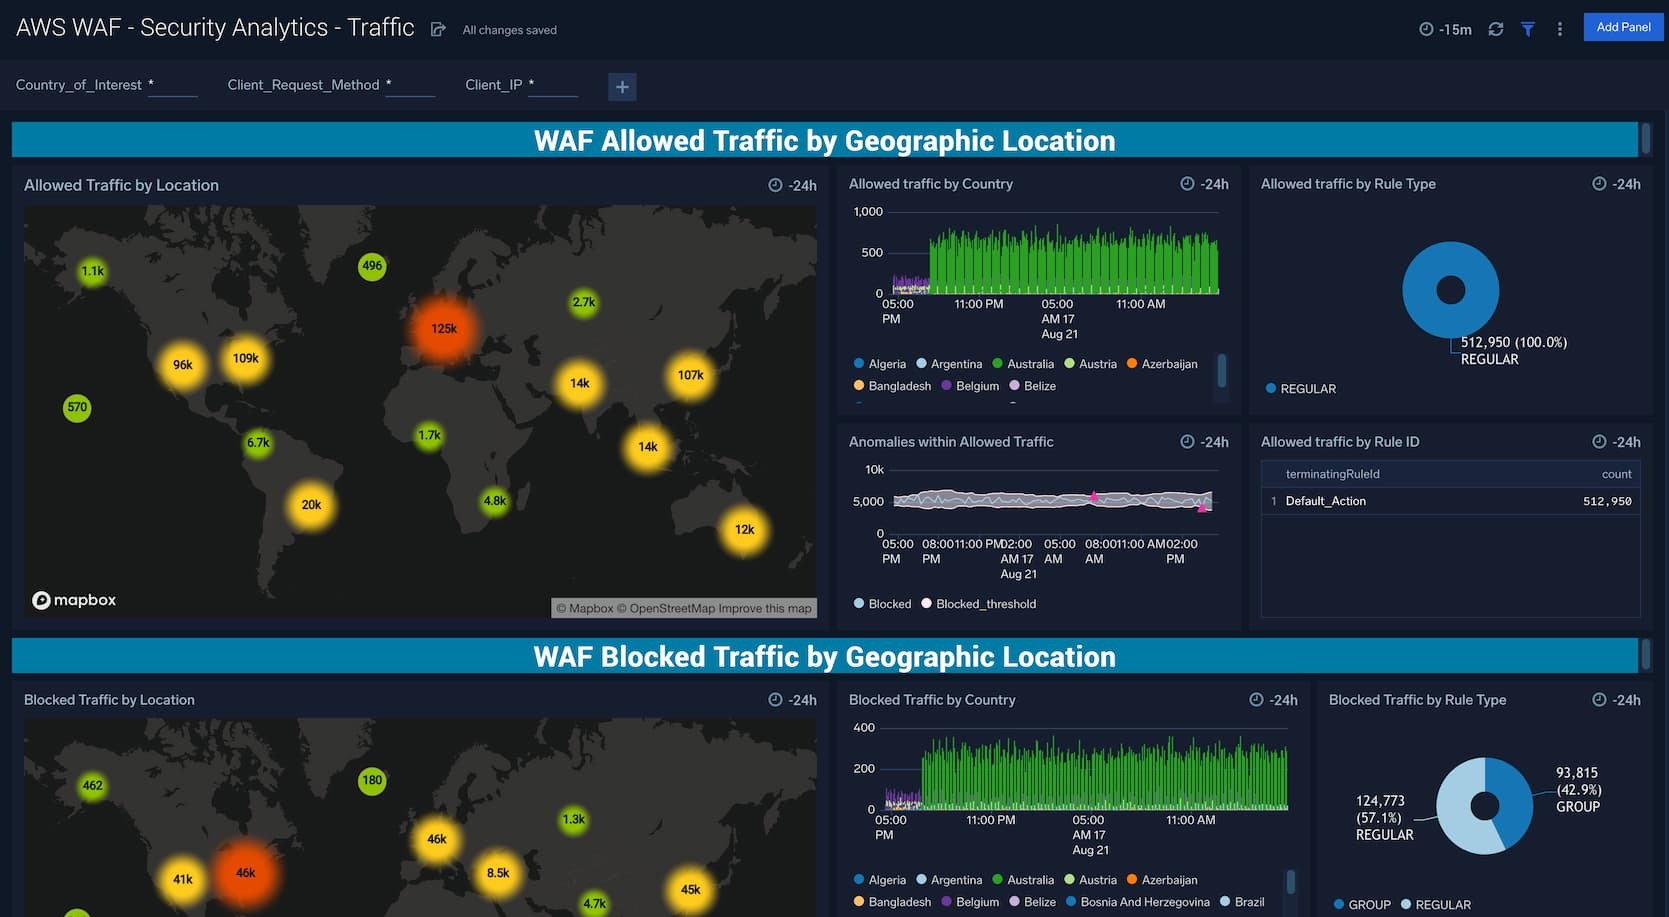 Cloud Security Monitoring & Analytics app for AWS WAF